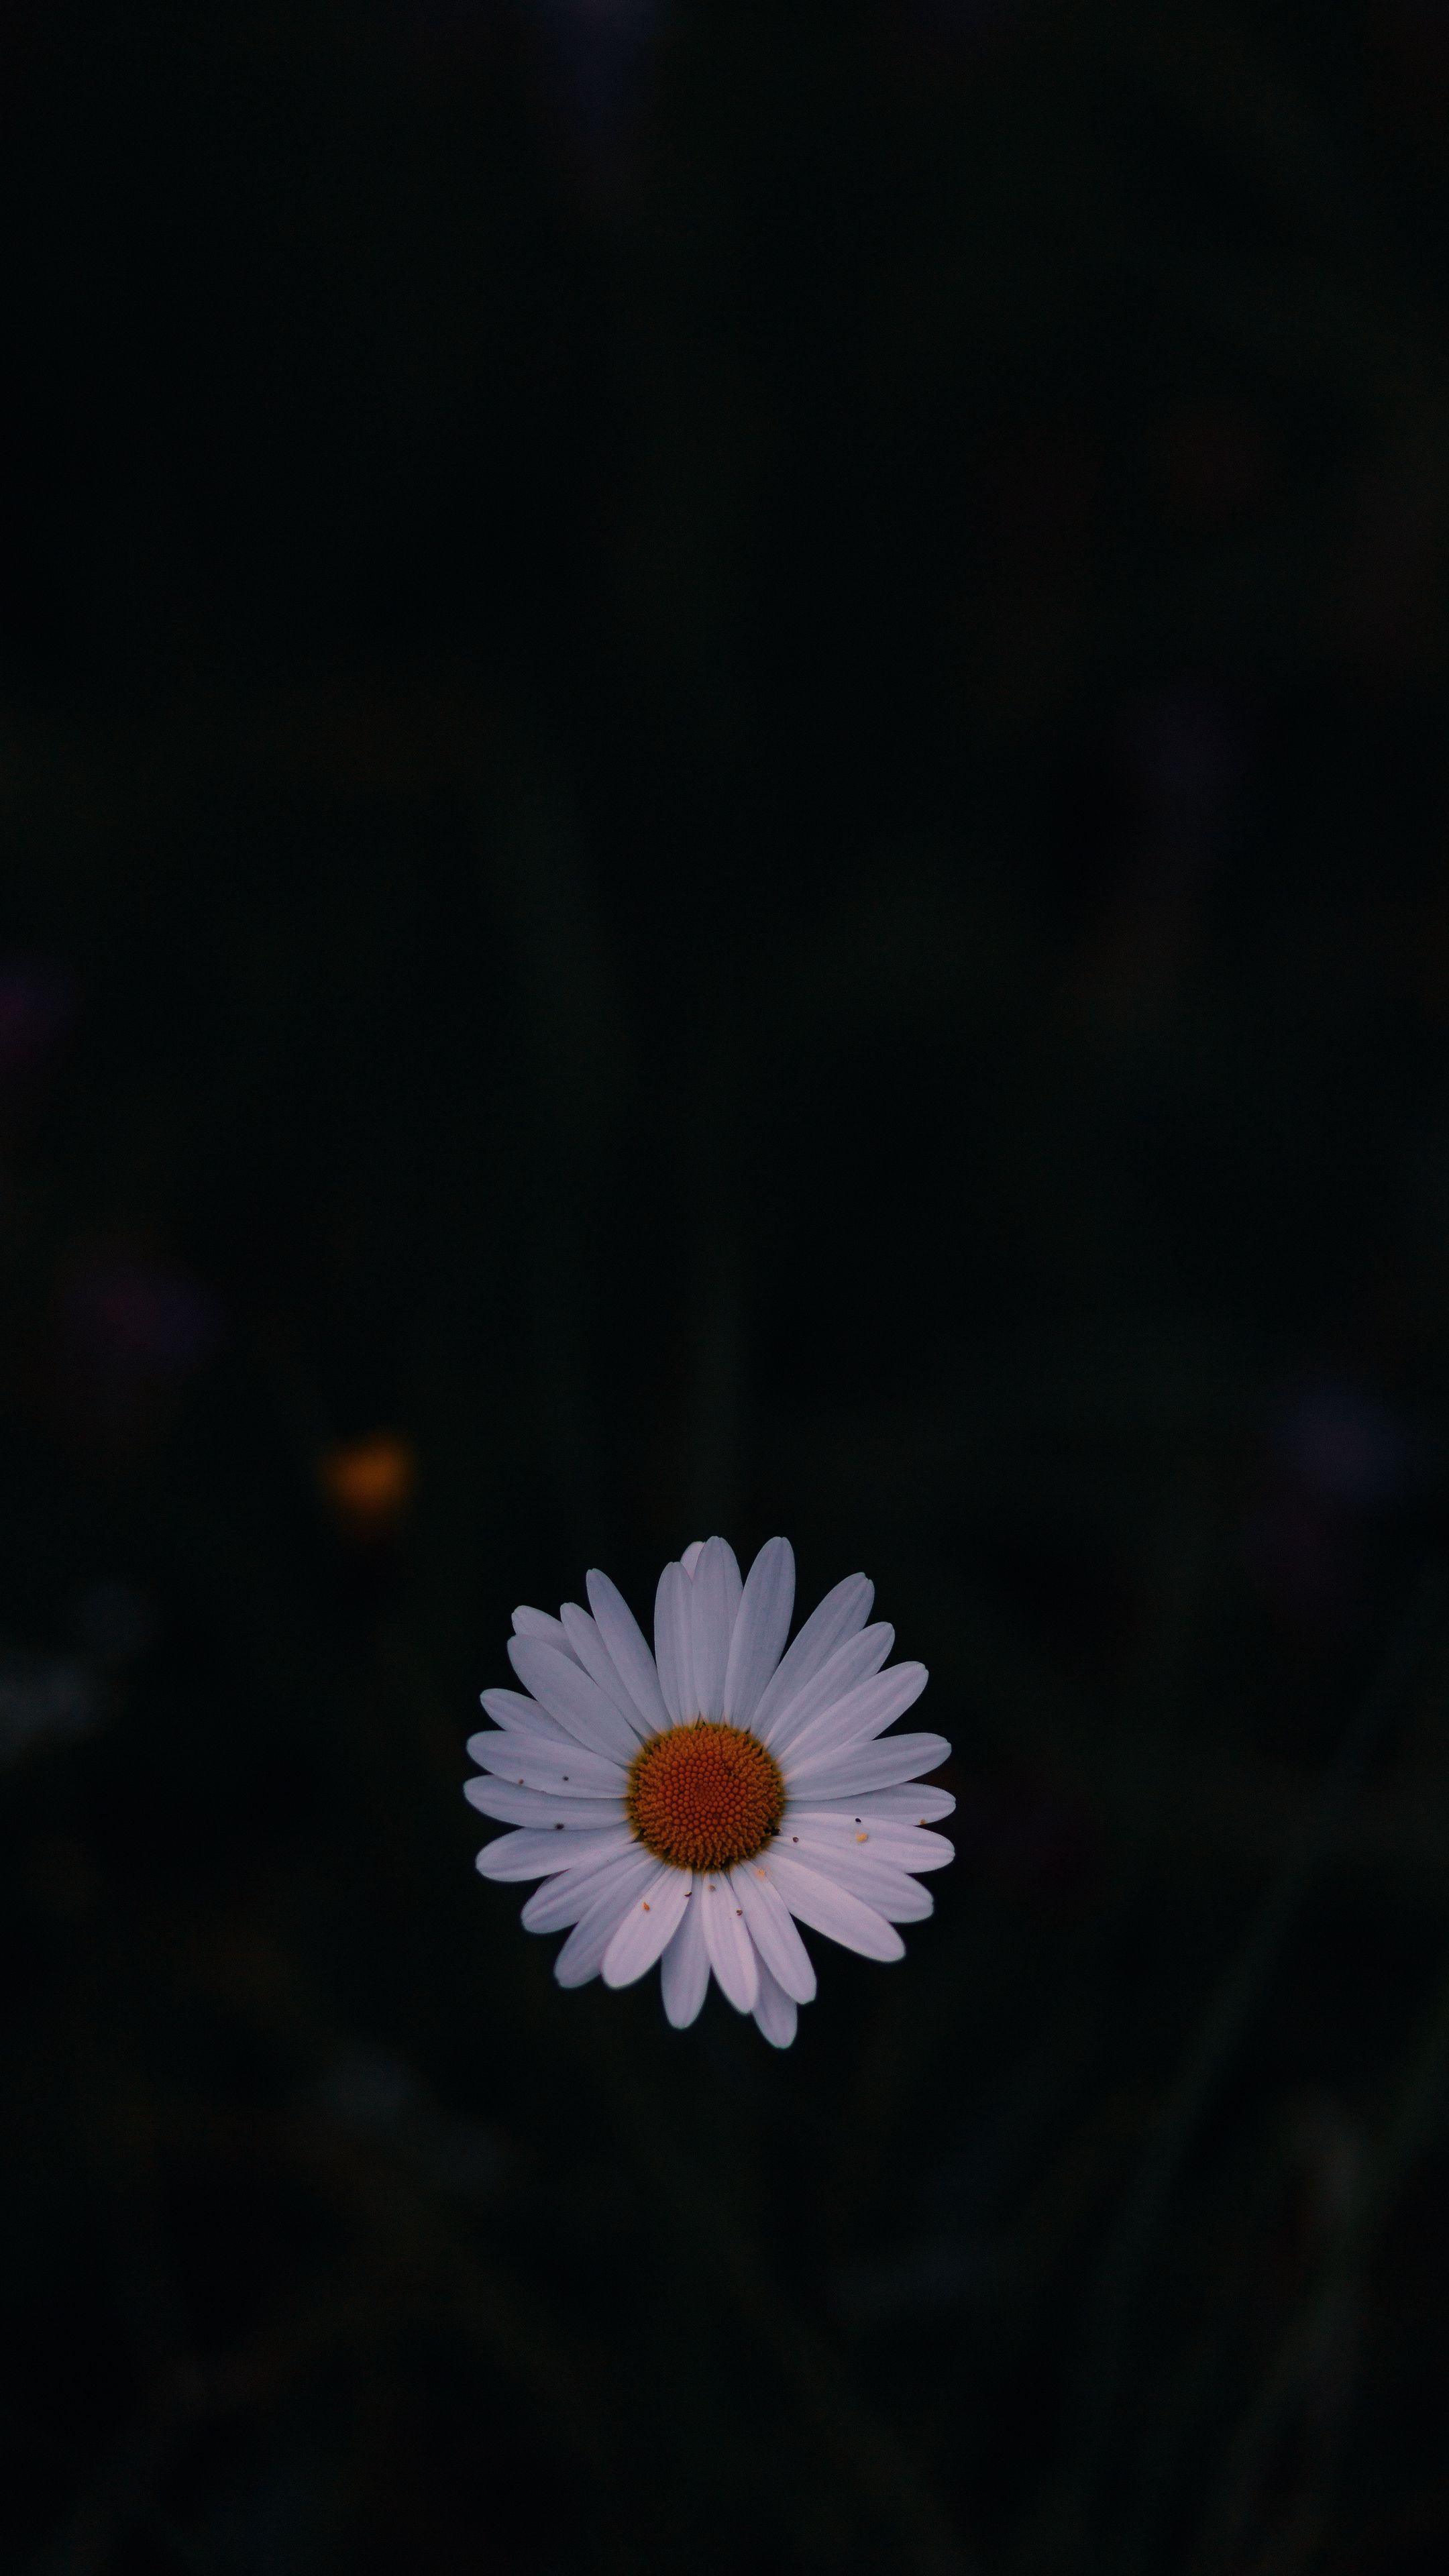 General 2160x3840 calm daisies portrait display low light simple background blurred nature